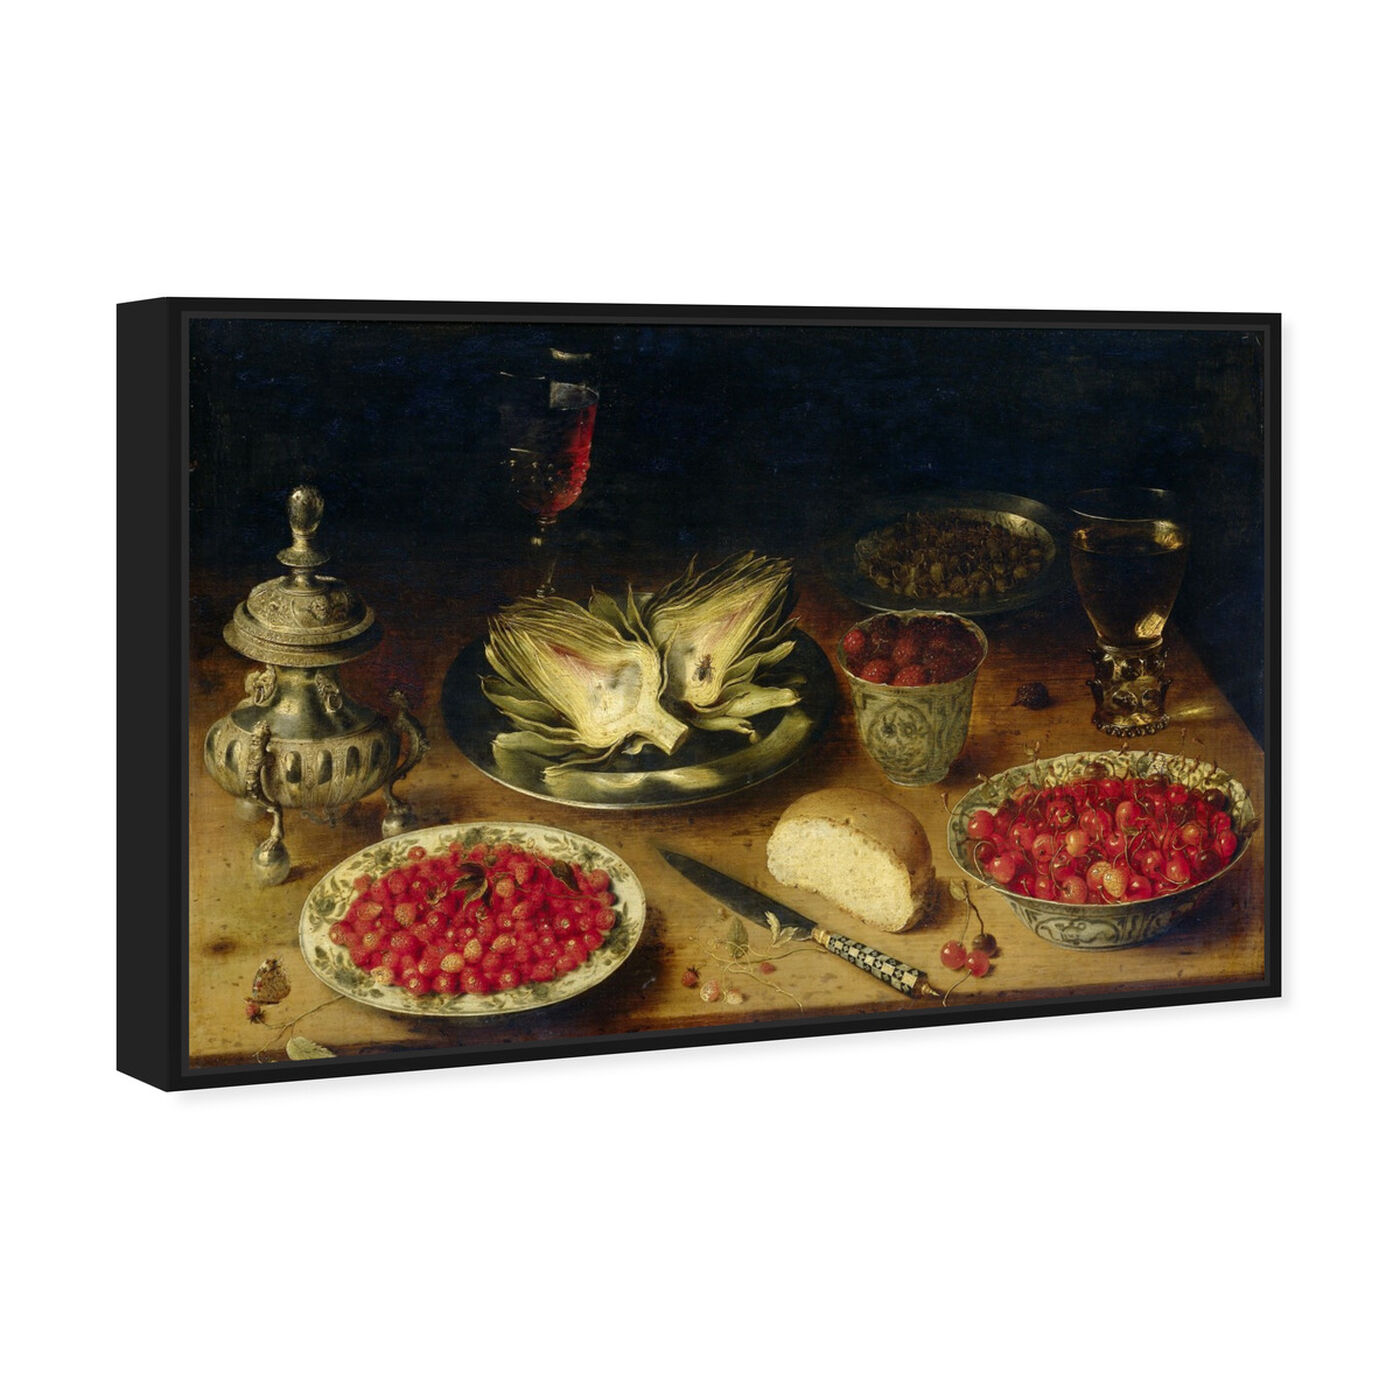 Angled view of Arranged Dinner Table - The Art Cabinet featuring classic and figurative and classic art.